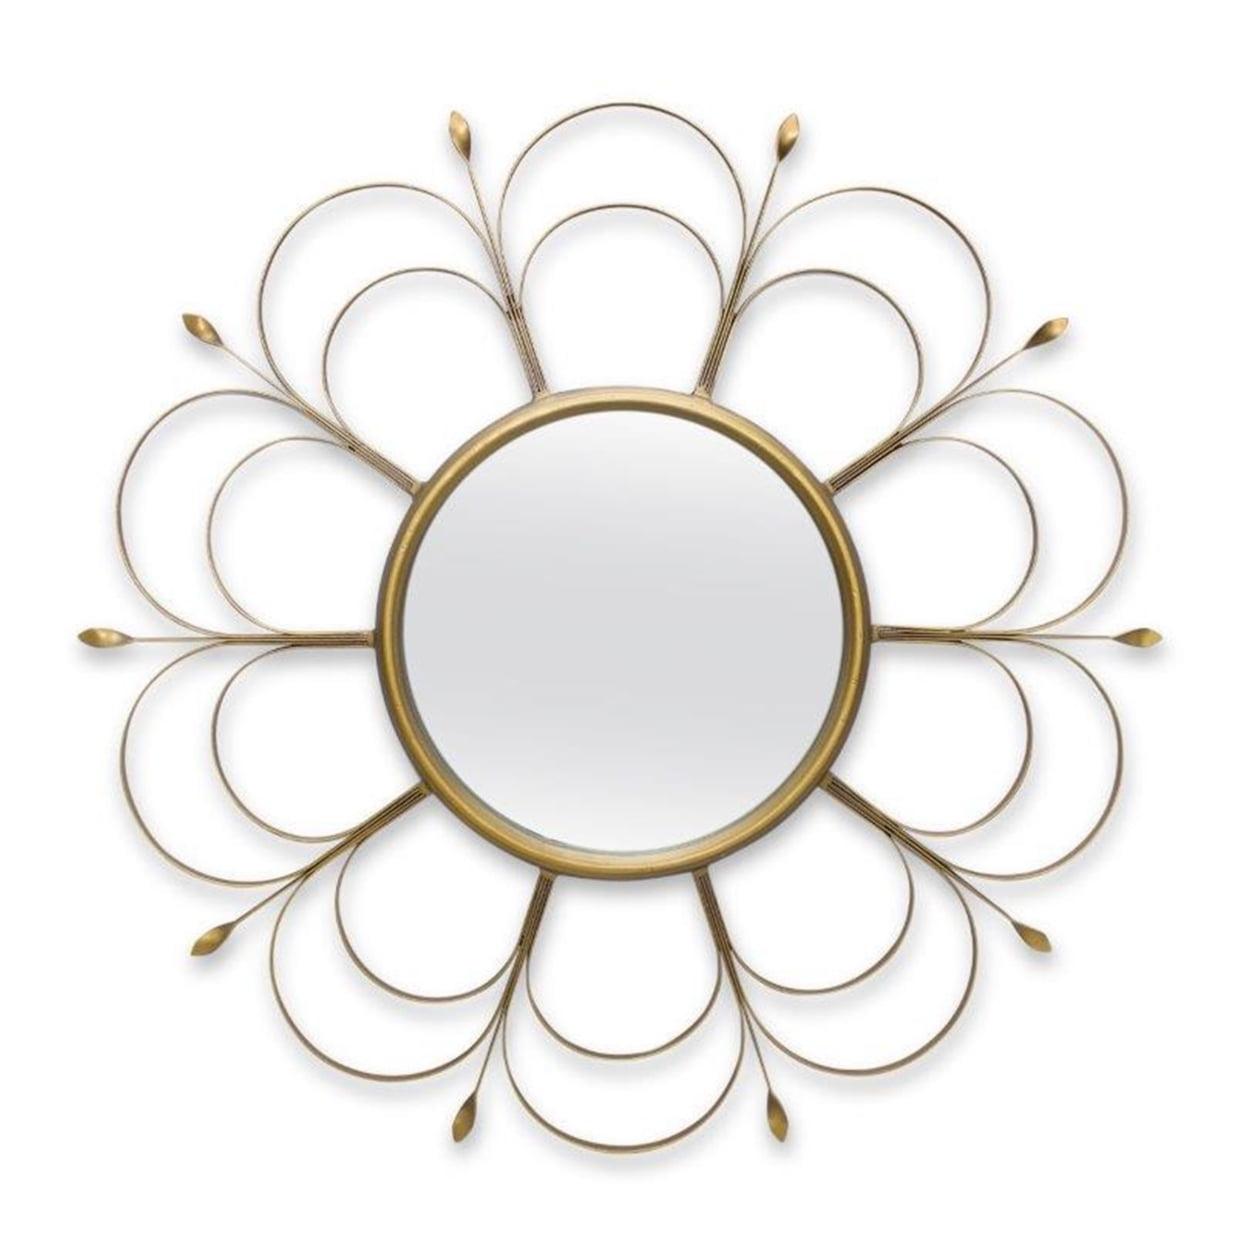 24" Round Gold-Toned Metal Wall Decor